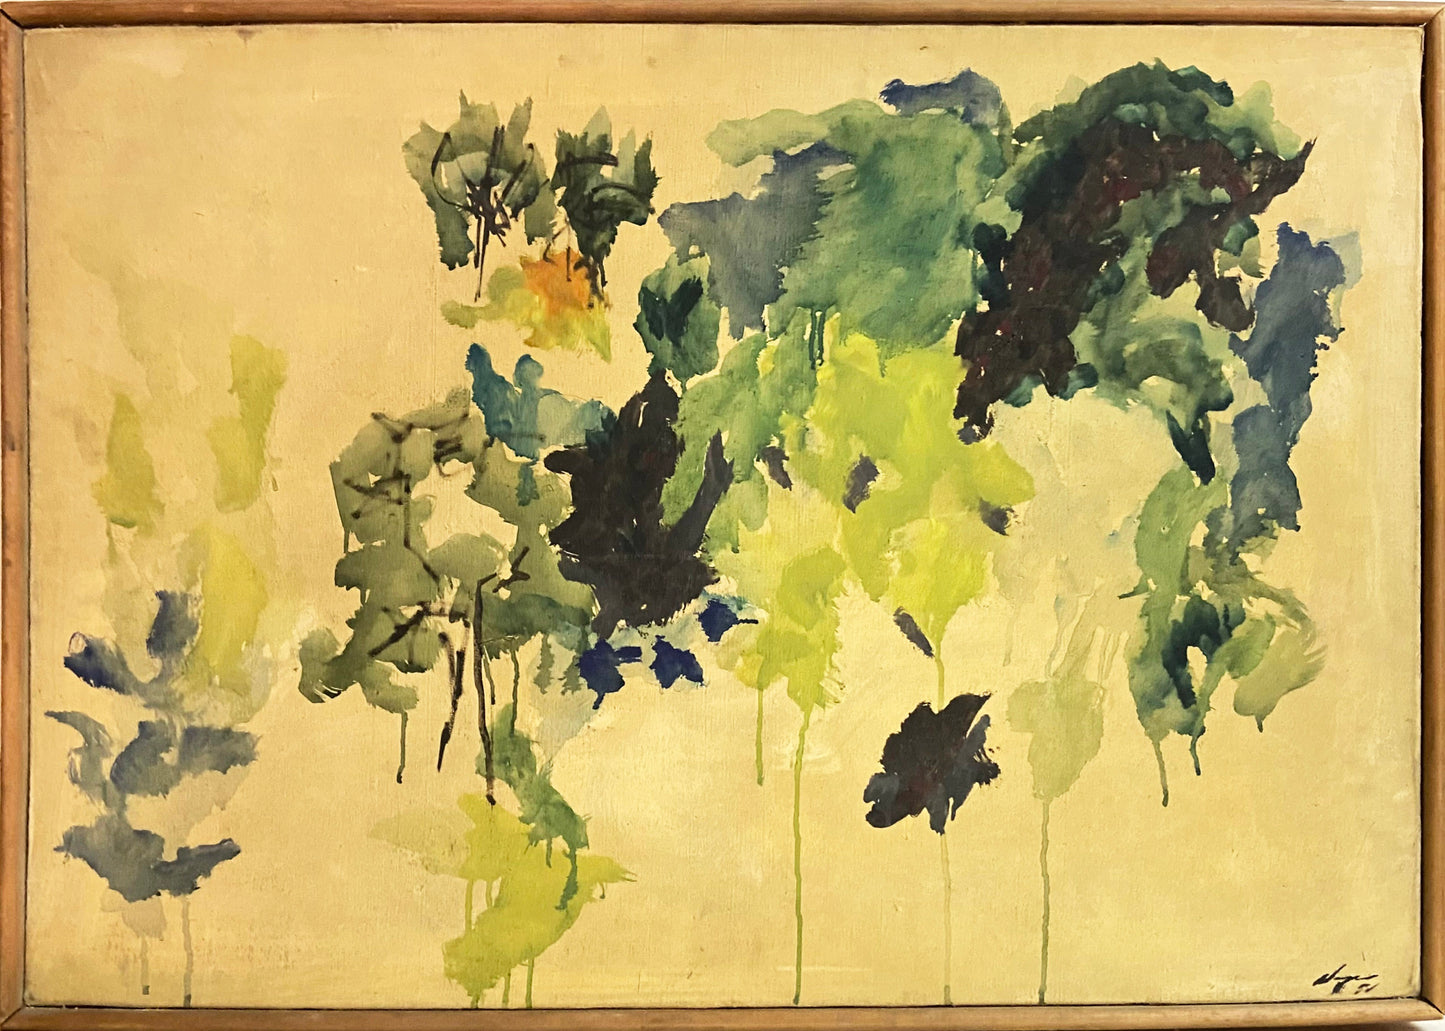 Norman Bluhm Oil Painting: Abstracted Flowers